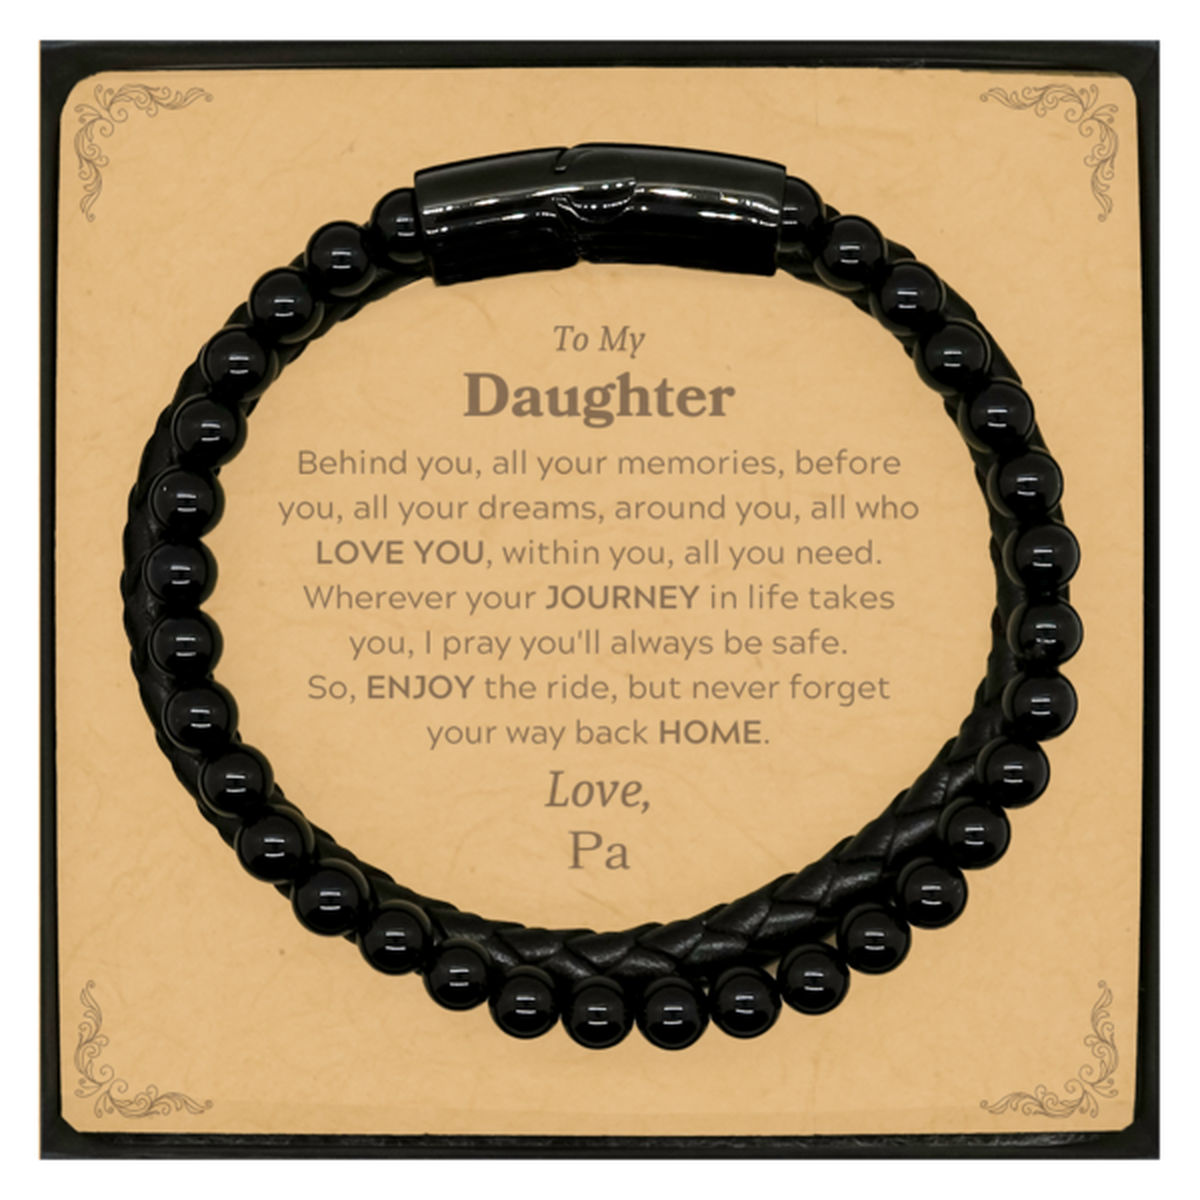 To My Daughter Graduation Gifts from Pa, Daughter Stone Leather Bracelets Christmas Birthday Gifts for Daughter Behind you, all your memories, before you, all your dreams. Love, Pa